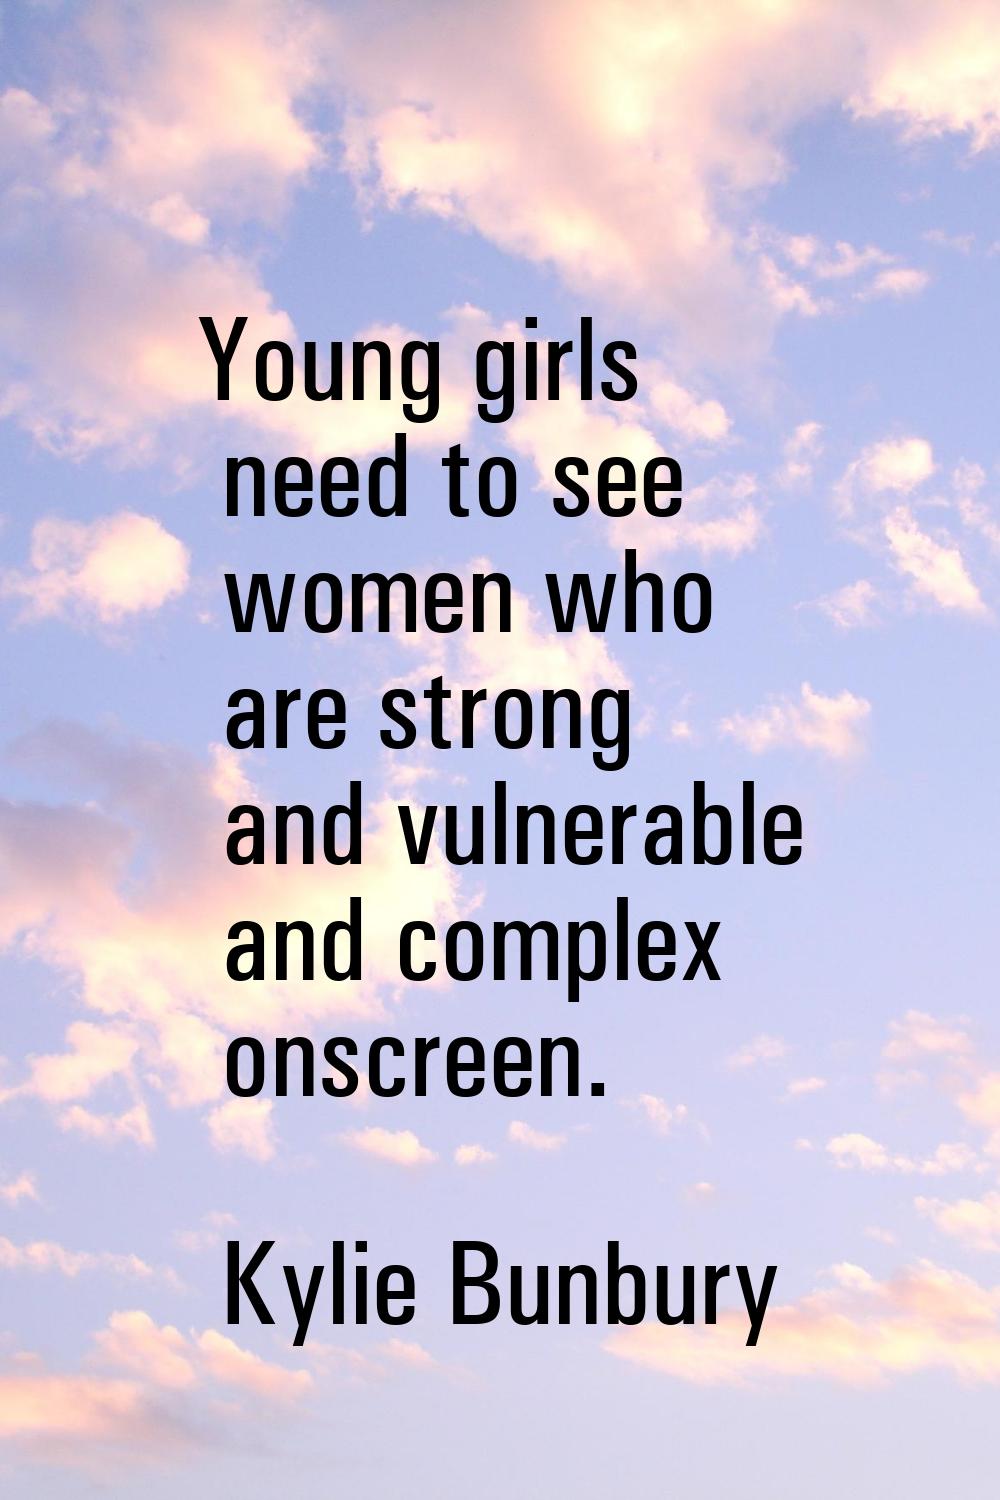 Young girls need to see women who are strong and vulnerable and complex onscreen.